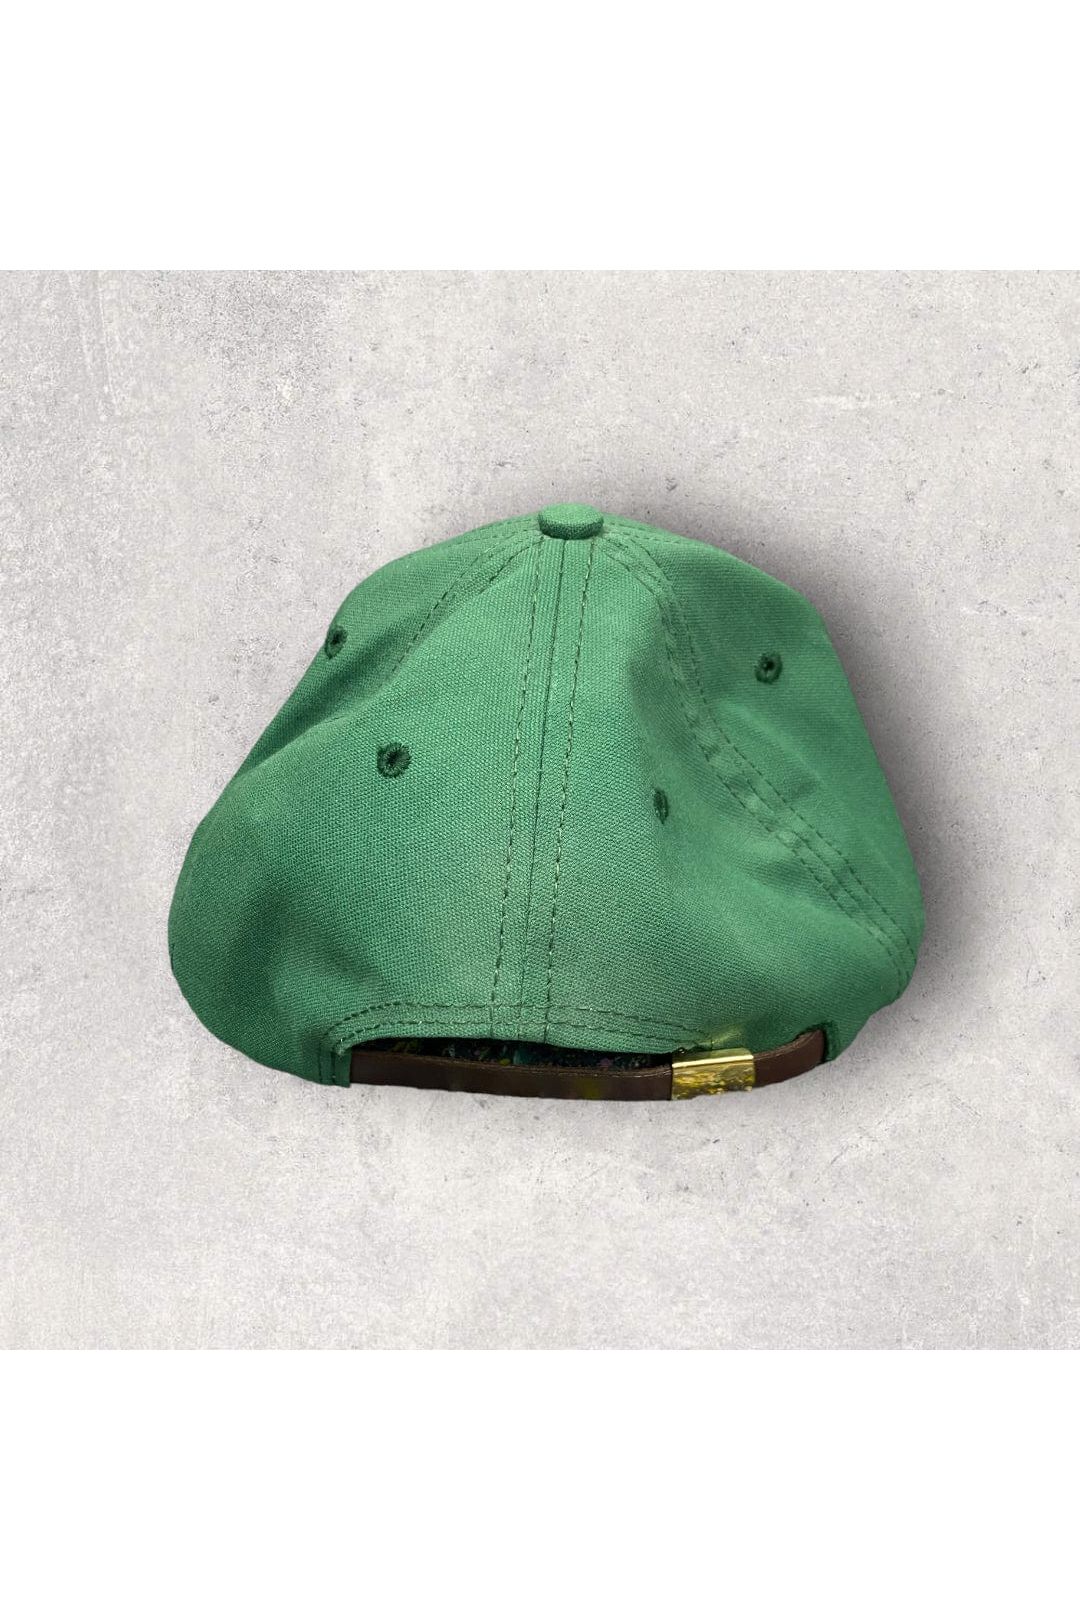 Vintage American Needle Exclusively Made for The Masters Hat